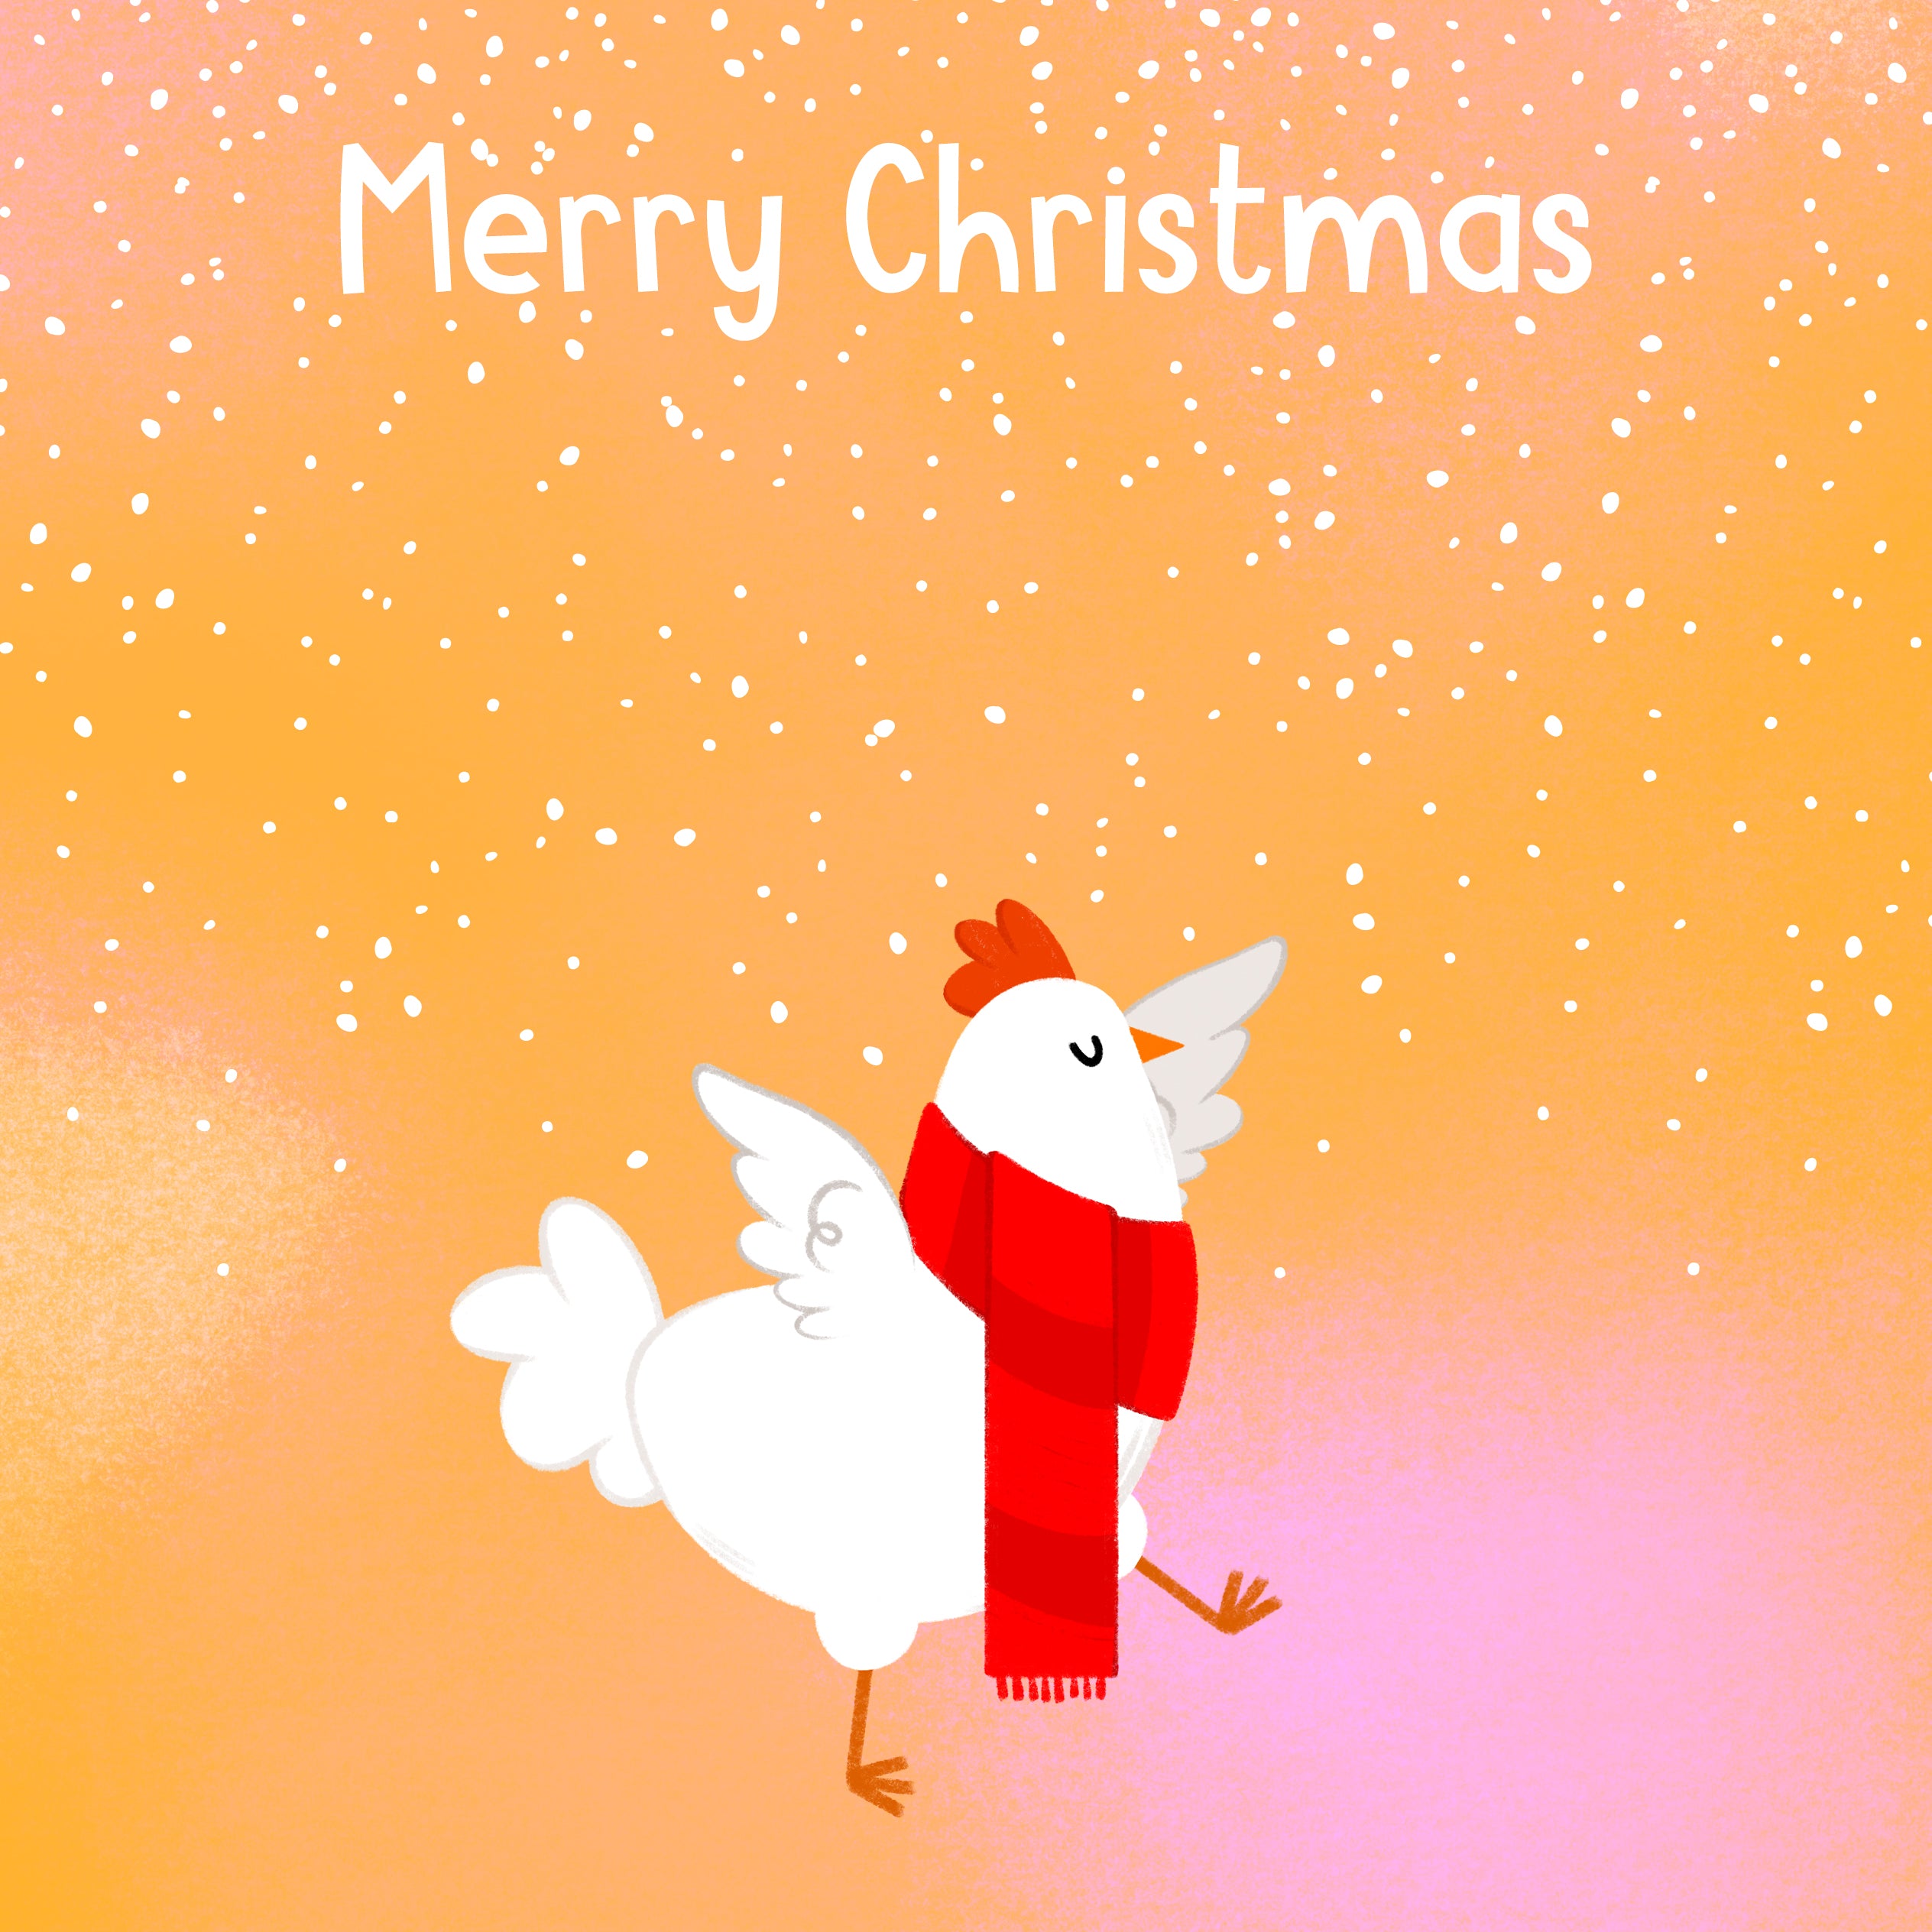 Merry Christmas Funny Chicken | Boomf